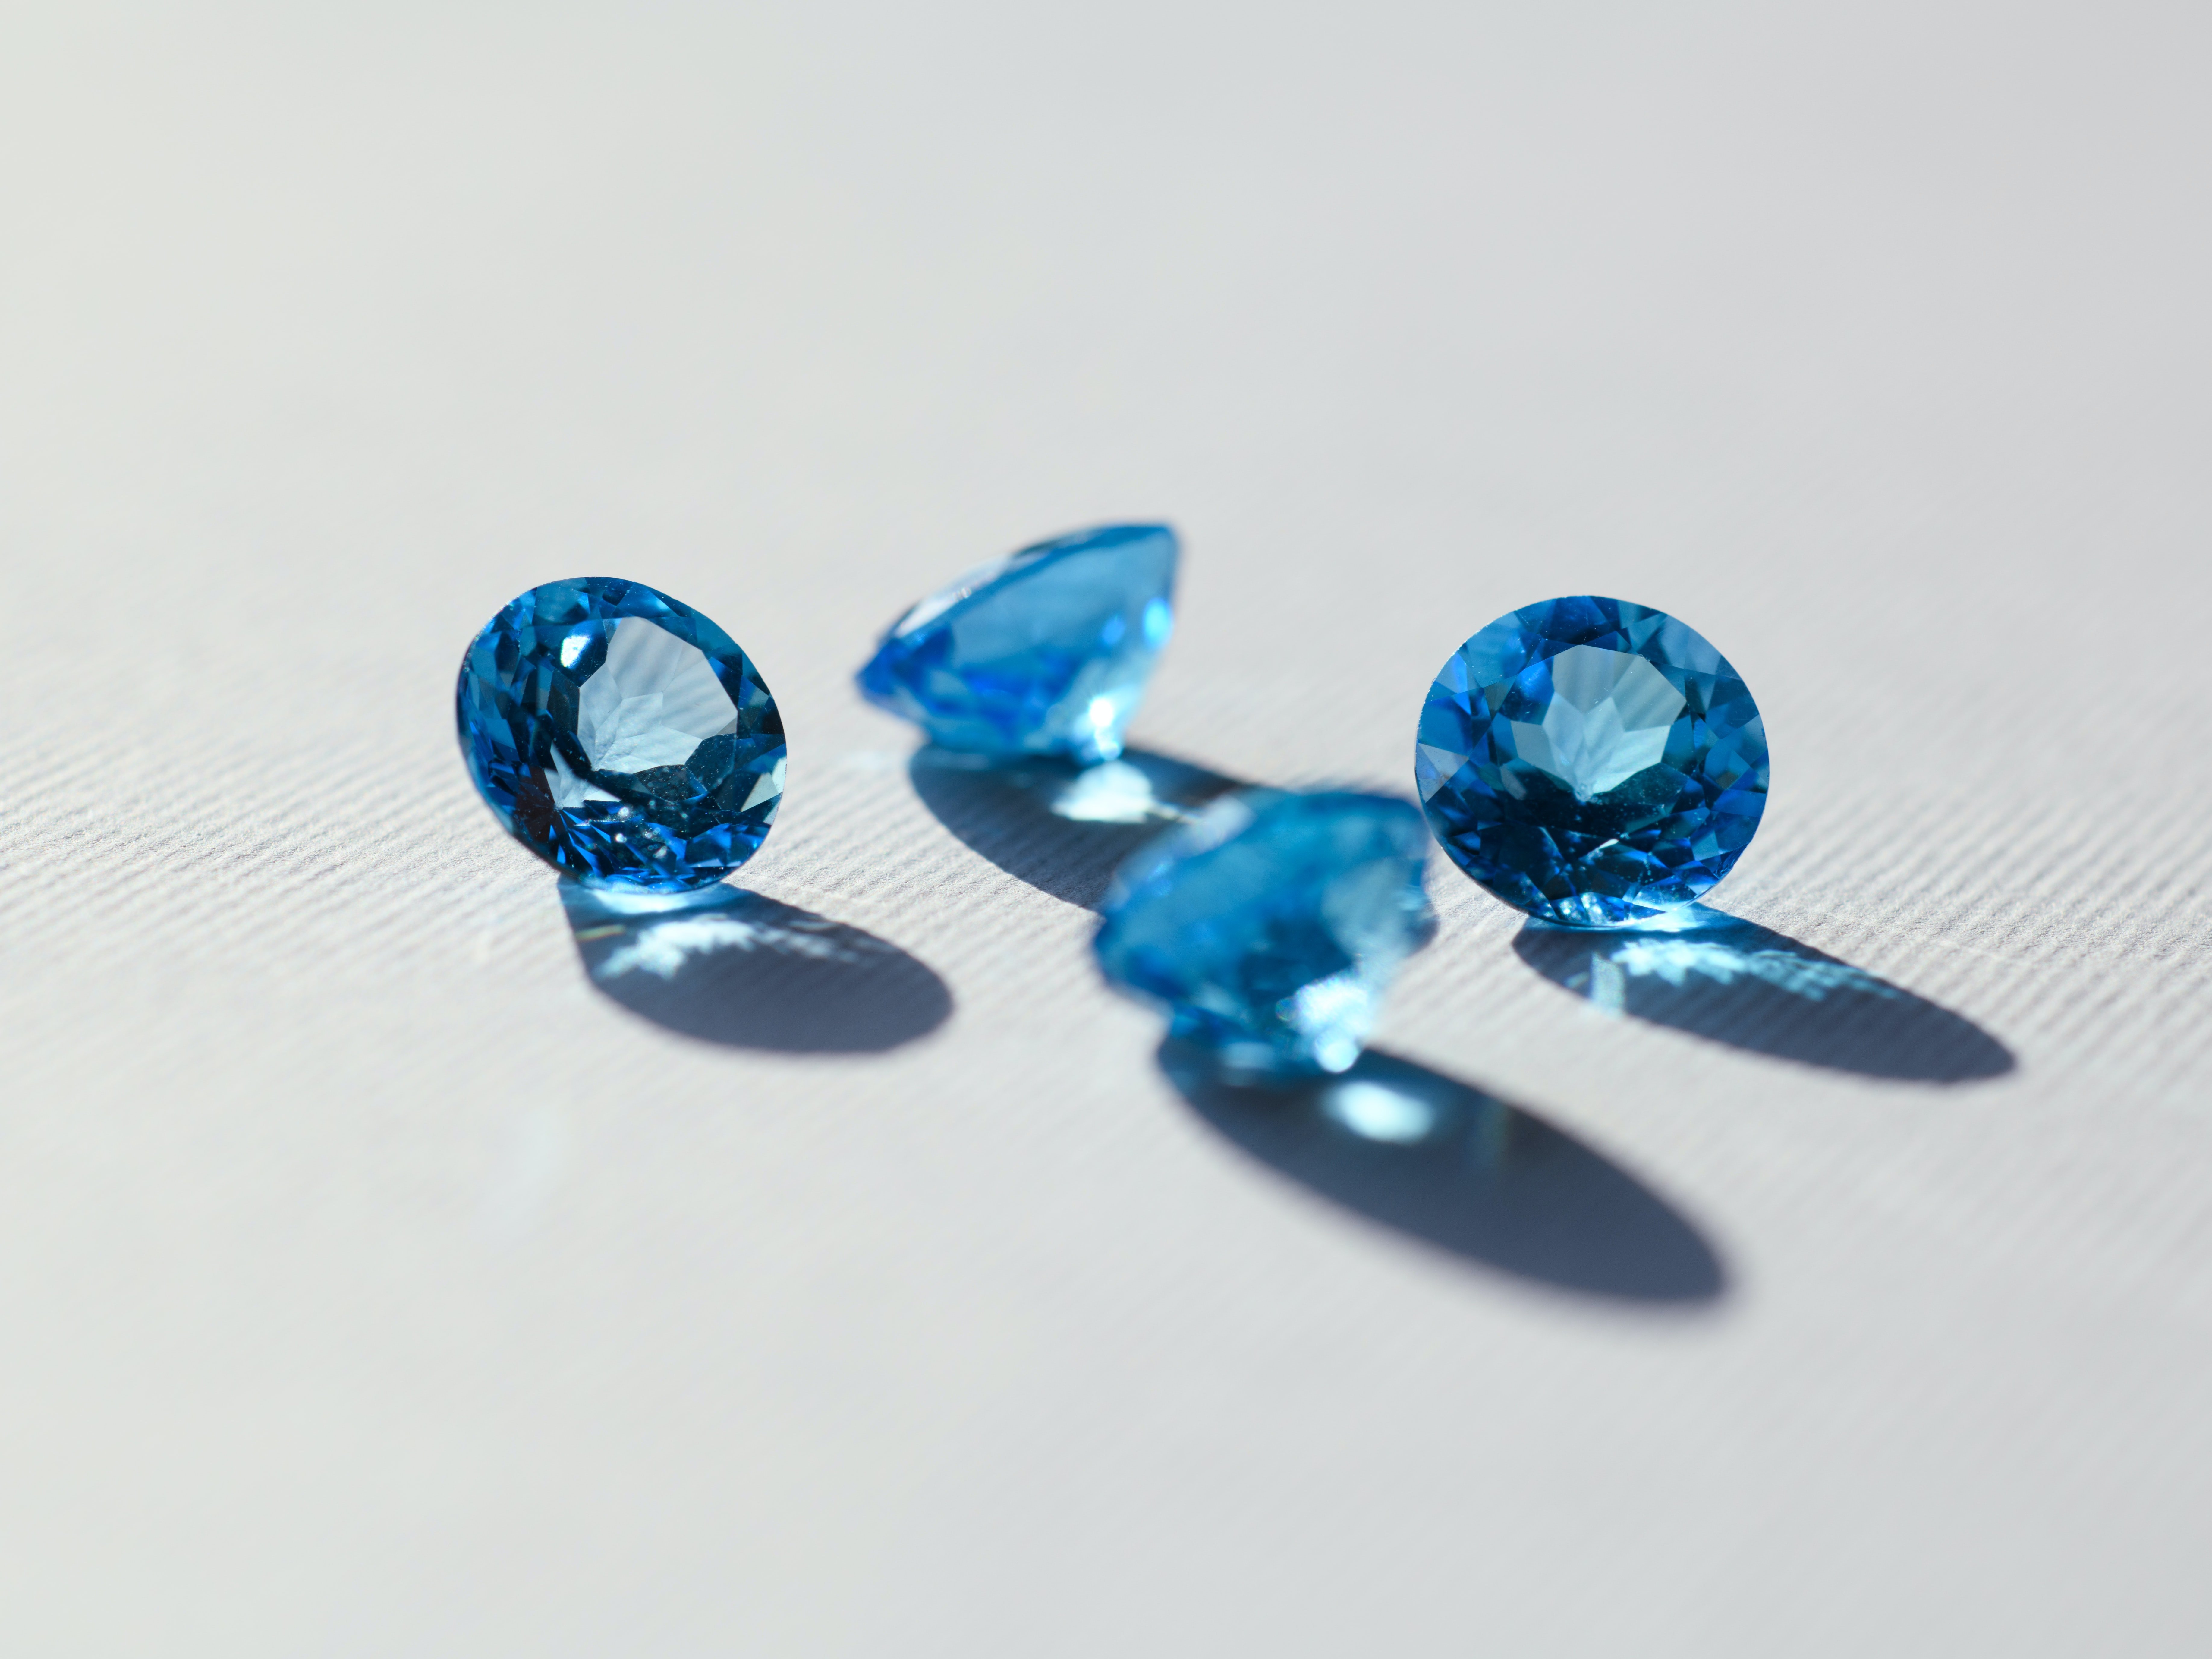 Blue sapphire gems are scattered on a white surface | Photo: Unsplash/Jacek Dylag 